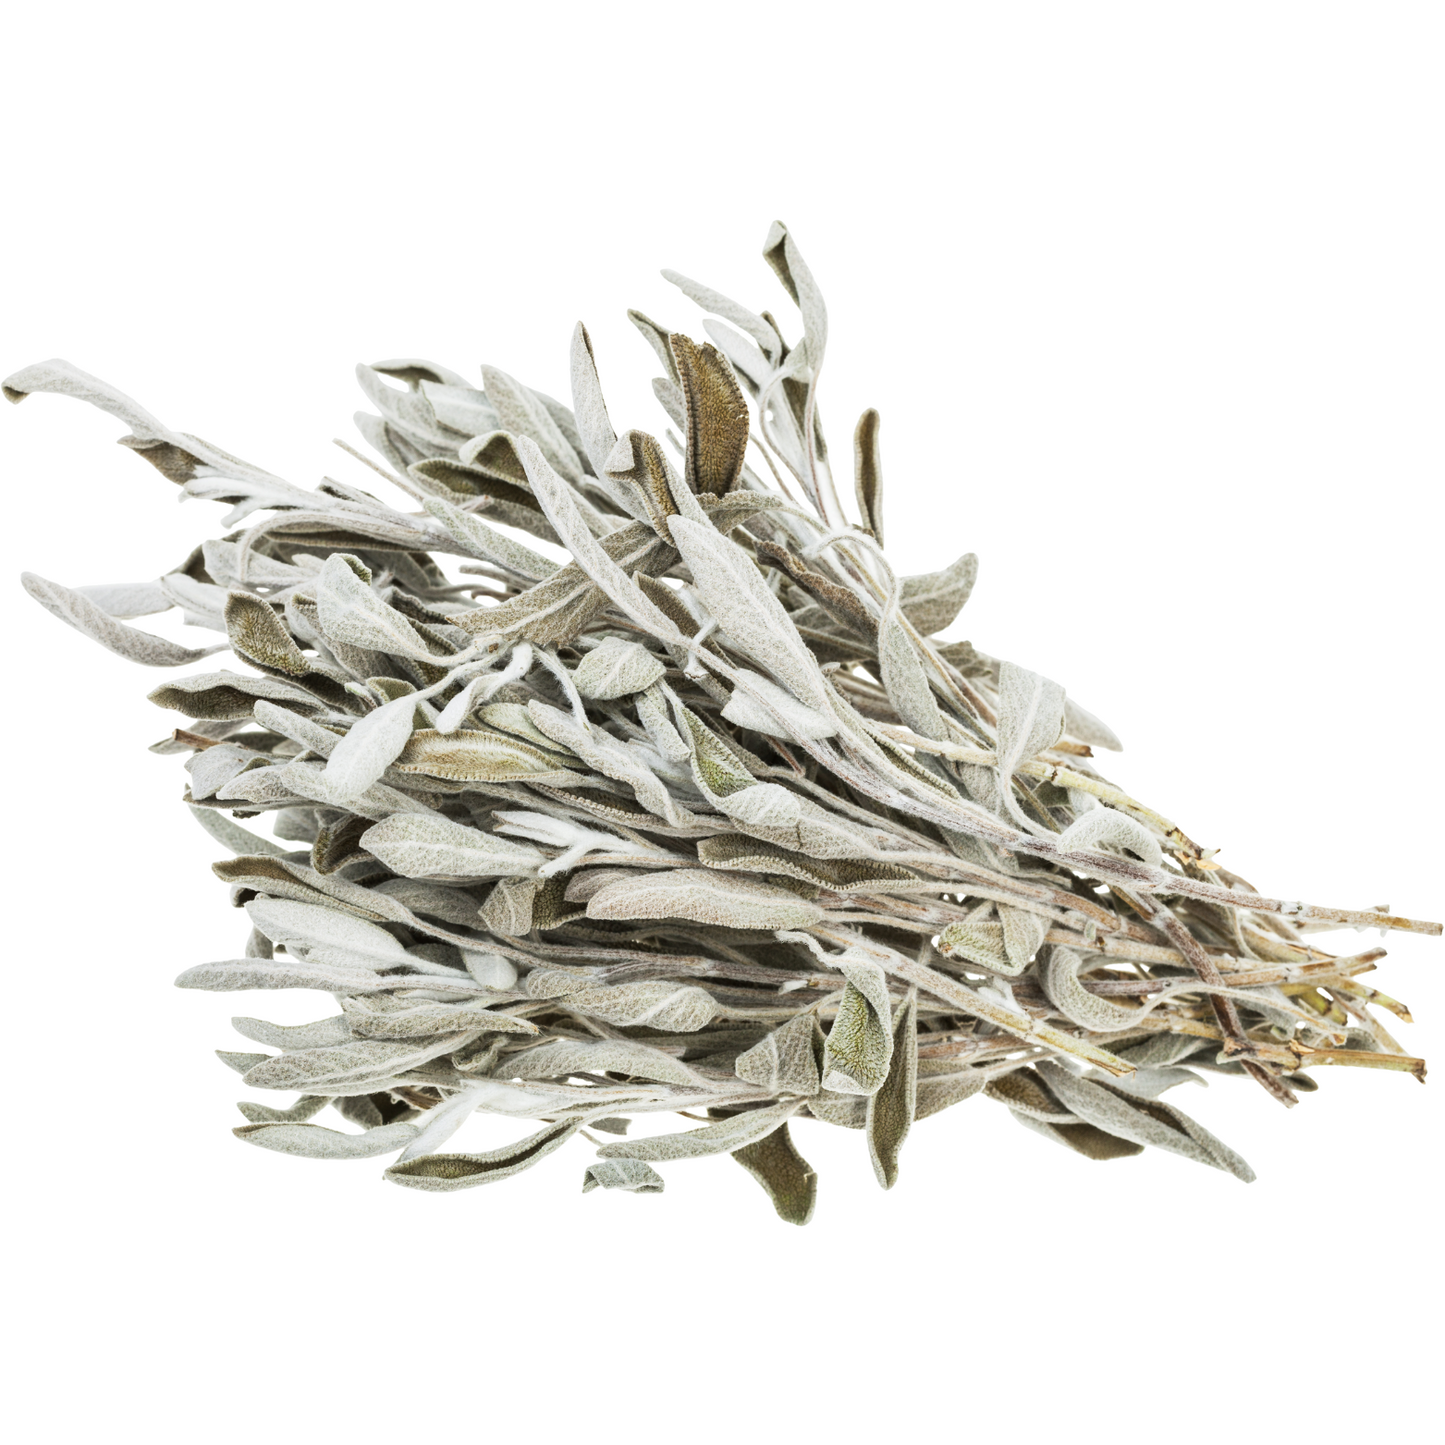 White Sage Whole Leaf for Smudging, Purification and Ritual